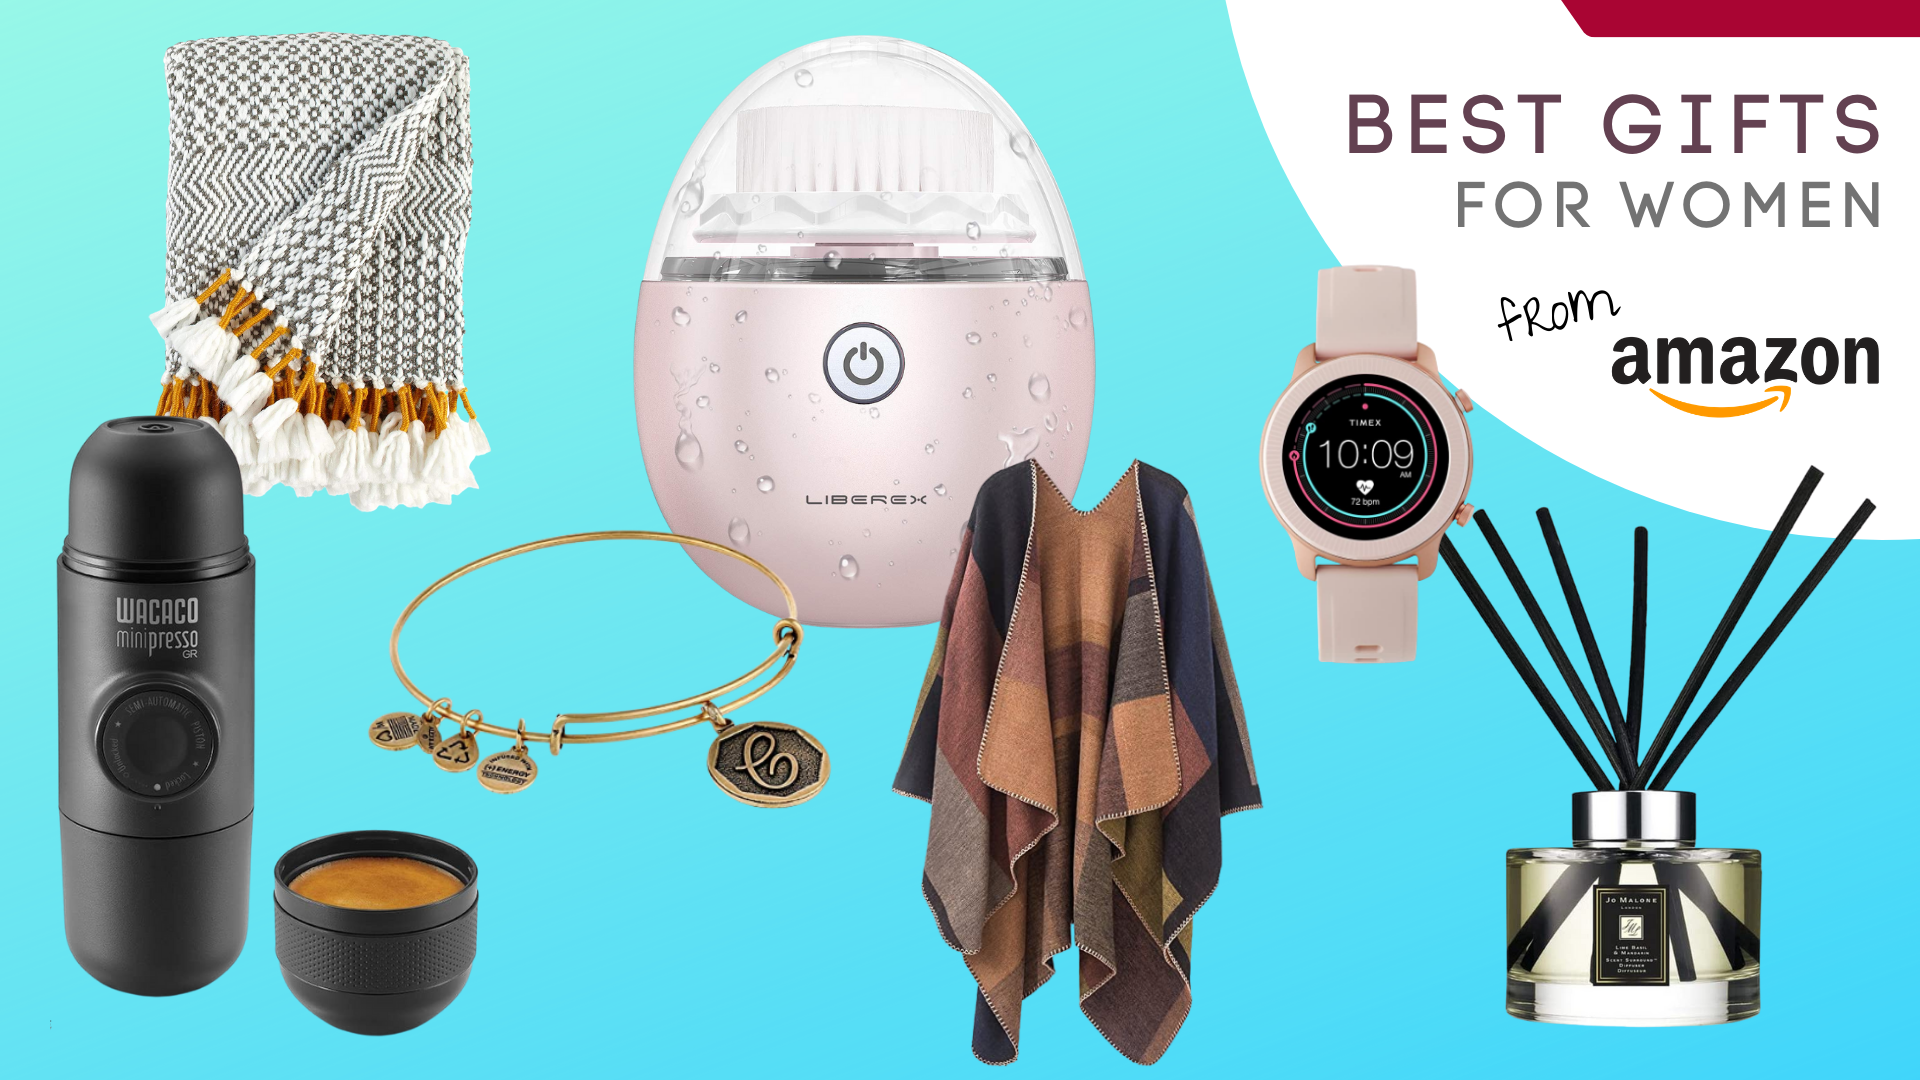 25 Best Gifts for Women from